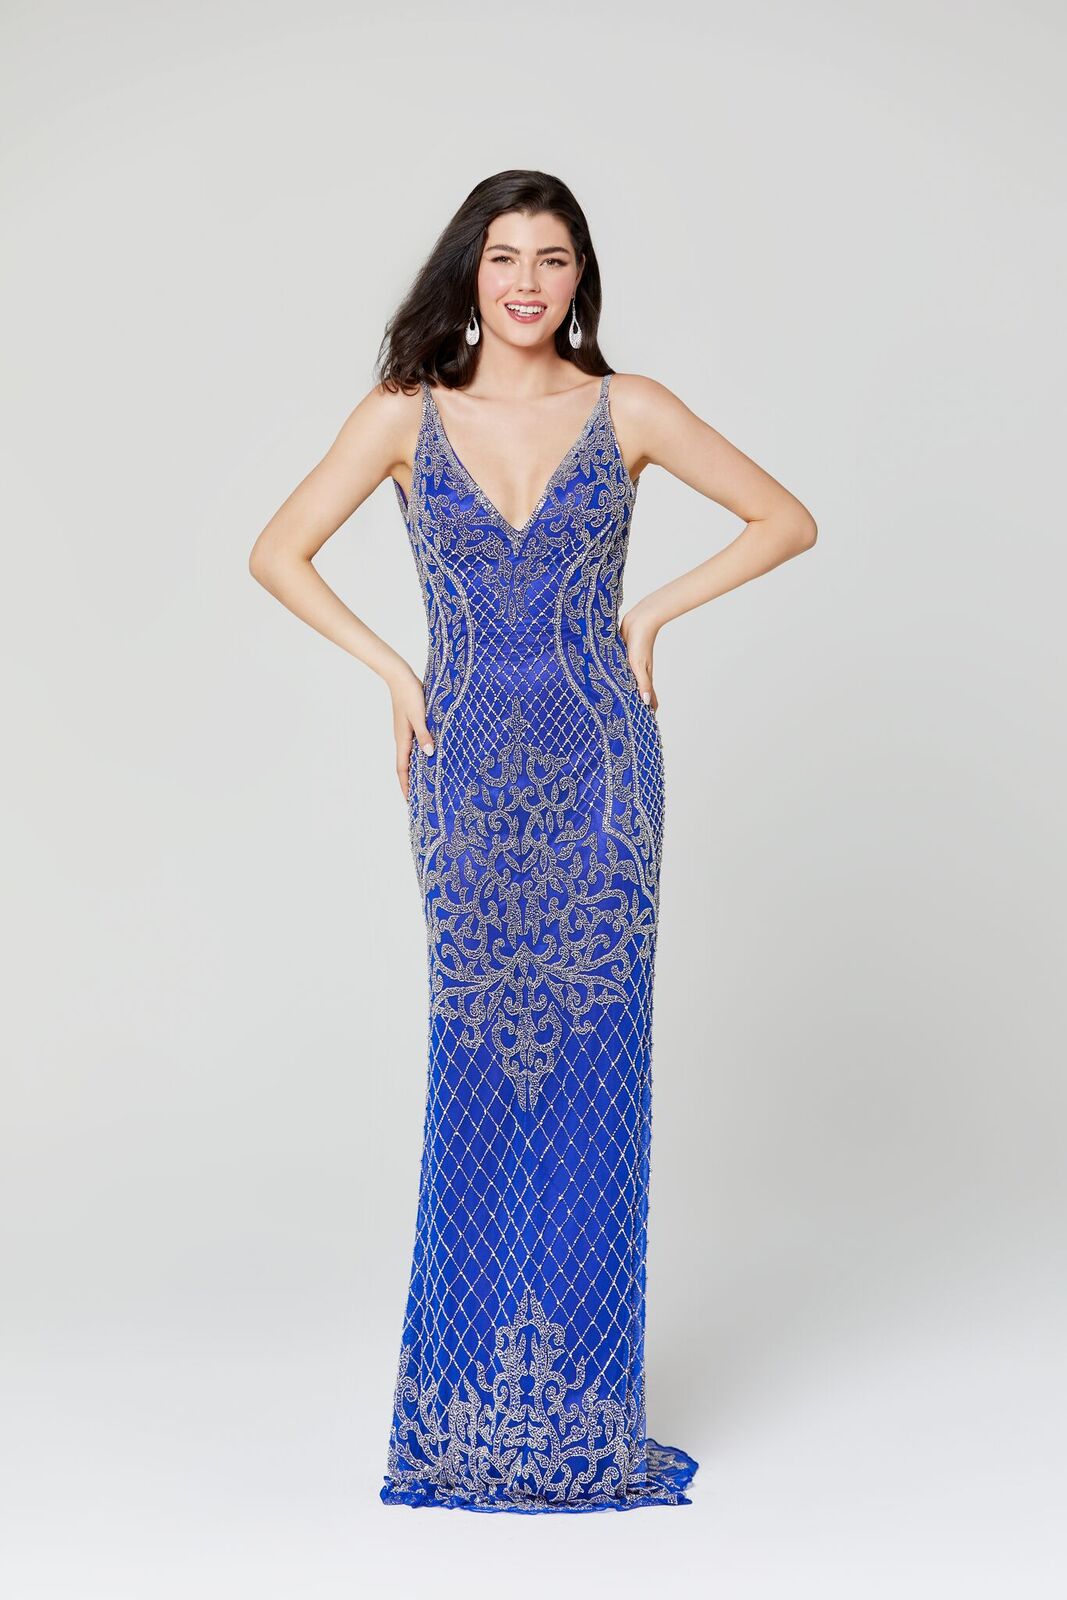 Primavera Couture 3415 spaghetti straps prom dress with v neckline beaded design evening gown with open low scoop back and no slit on this dress to show the beaded work on the hem of the dress. Hand Beaded & Embellished V Neck Formal Evening Gown Pageant Dress